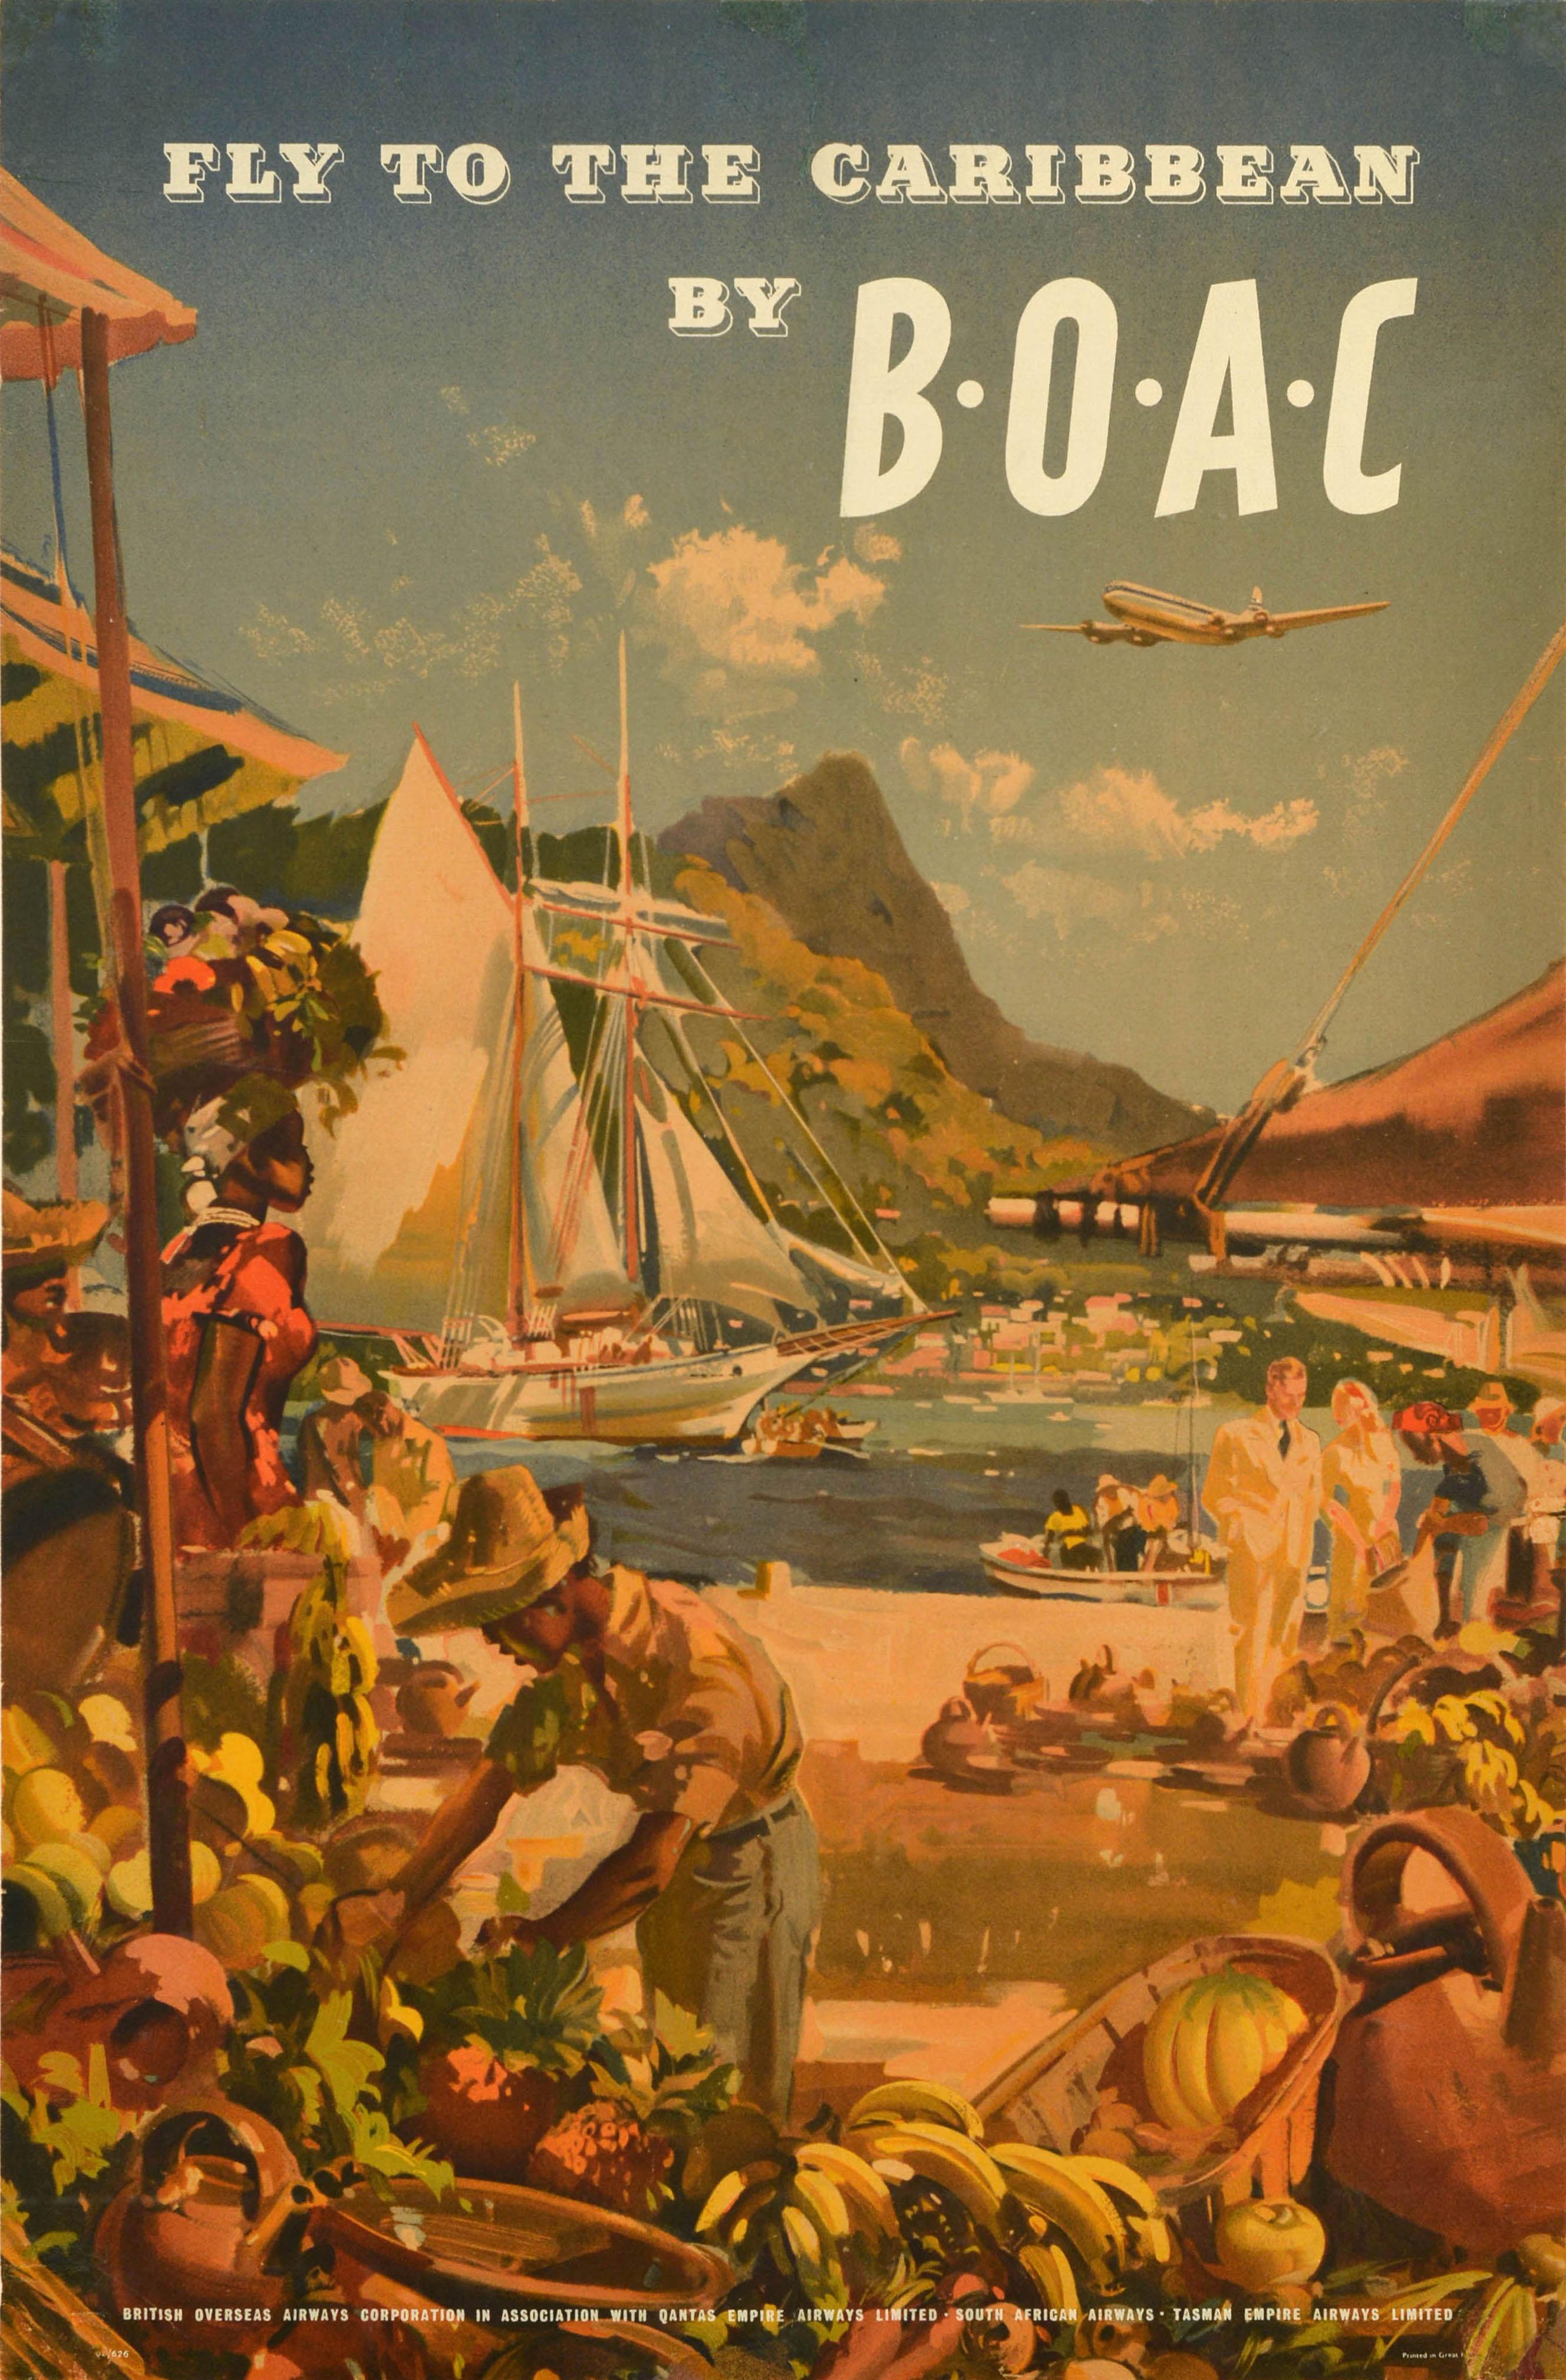 Frank Wootton Print - Original Vintage Travel Advertising Poster Fly To The Caribbean By BOAC Wootton